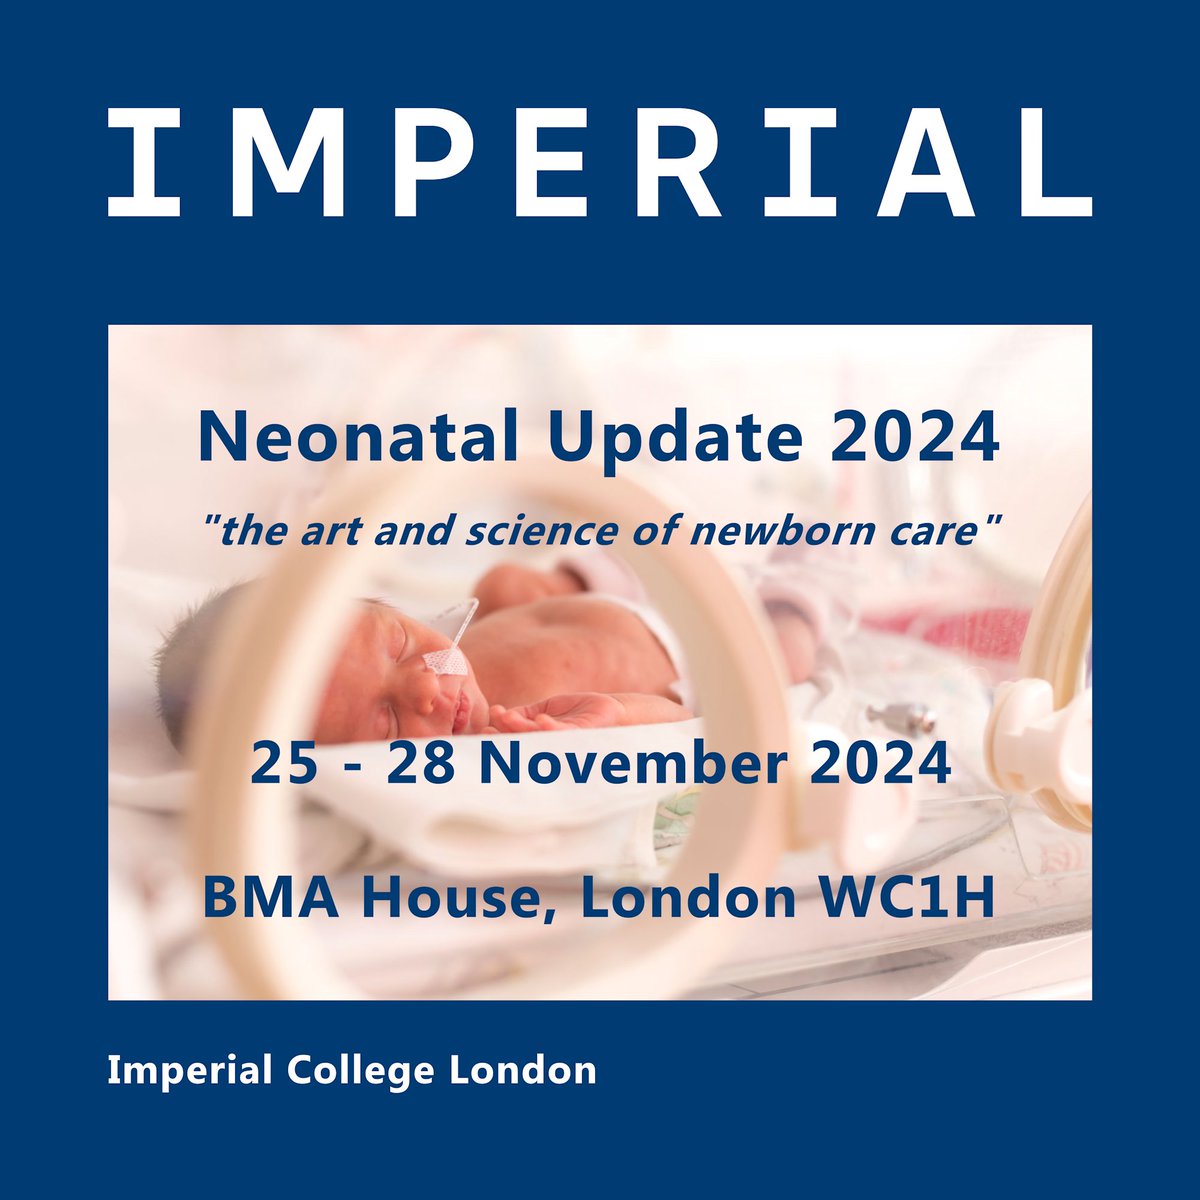 'A fantastic meeting with very relevant topics - counting on being back next year.' Always pleased to share such positive feedback from returning delegates. For this year's programme visit bit.ly/NeonatalUpdate… #neonataludpate24 #neotwitter @RCPCHtweets @imperialcollege